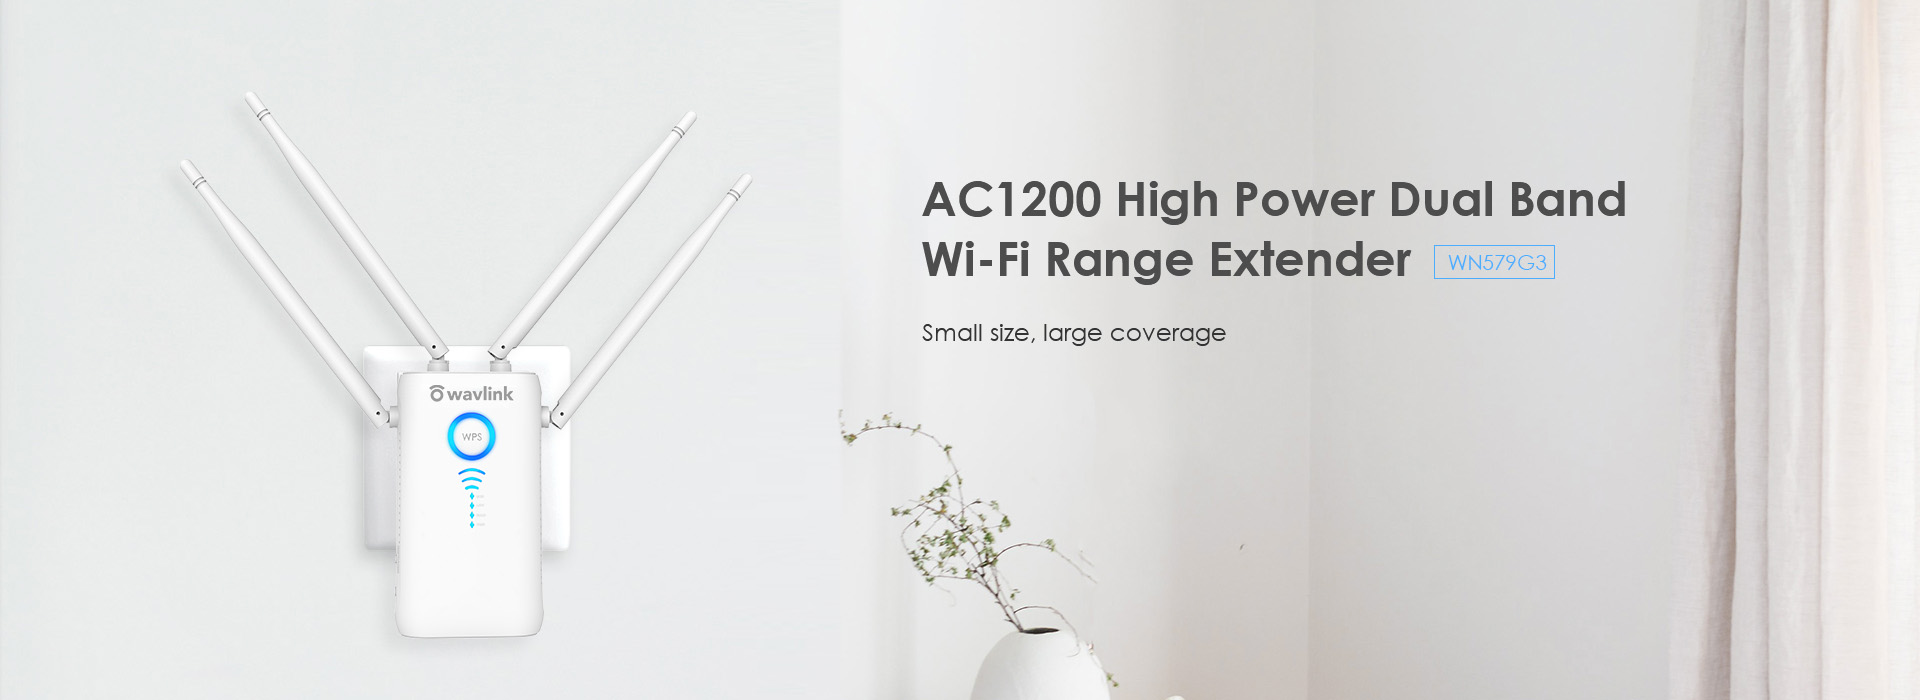 AC1200 Dual-band Wireless  AP/Range Extender/Router with Dual Giga  LAN and High Power Antennas